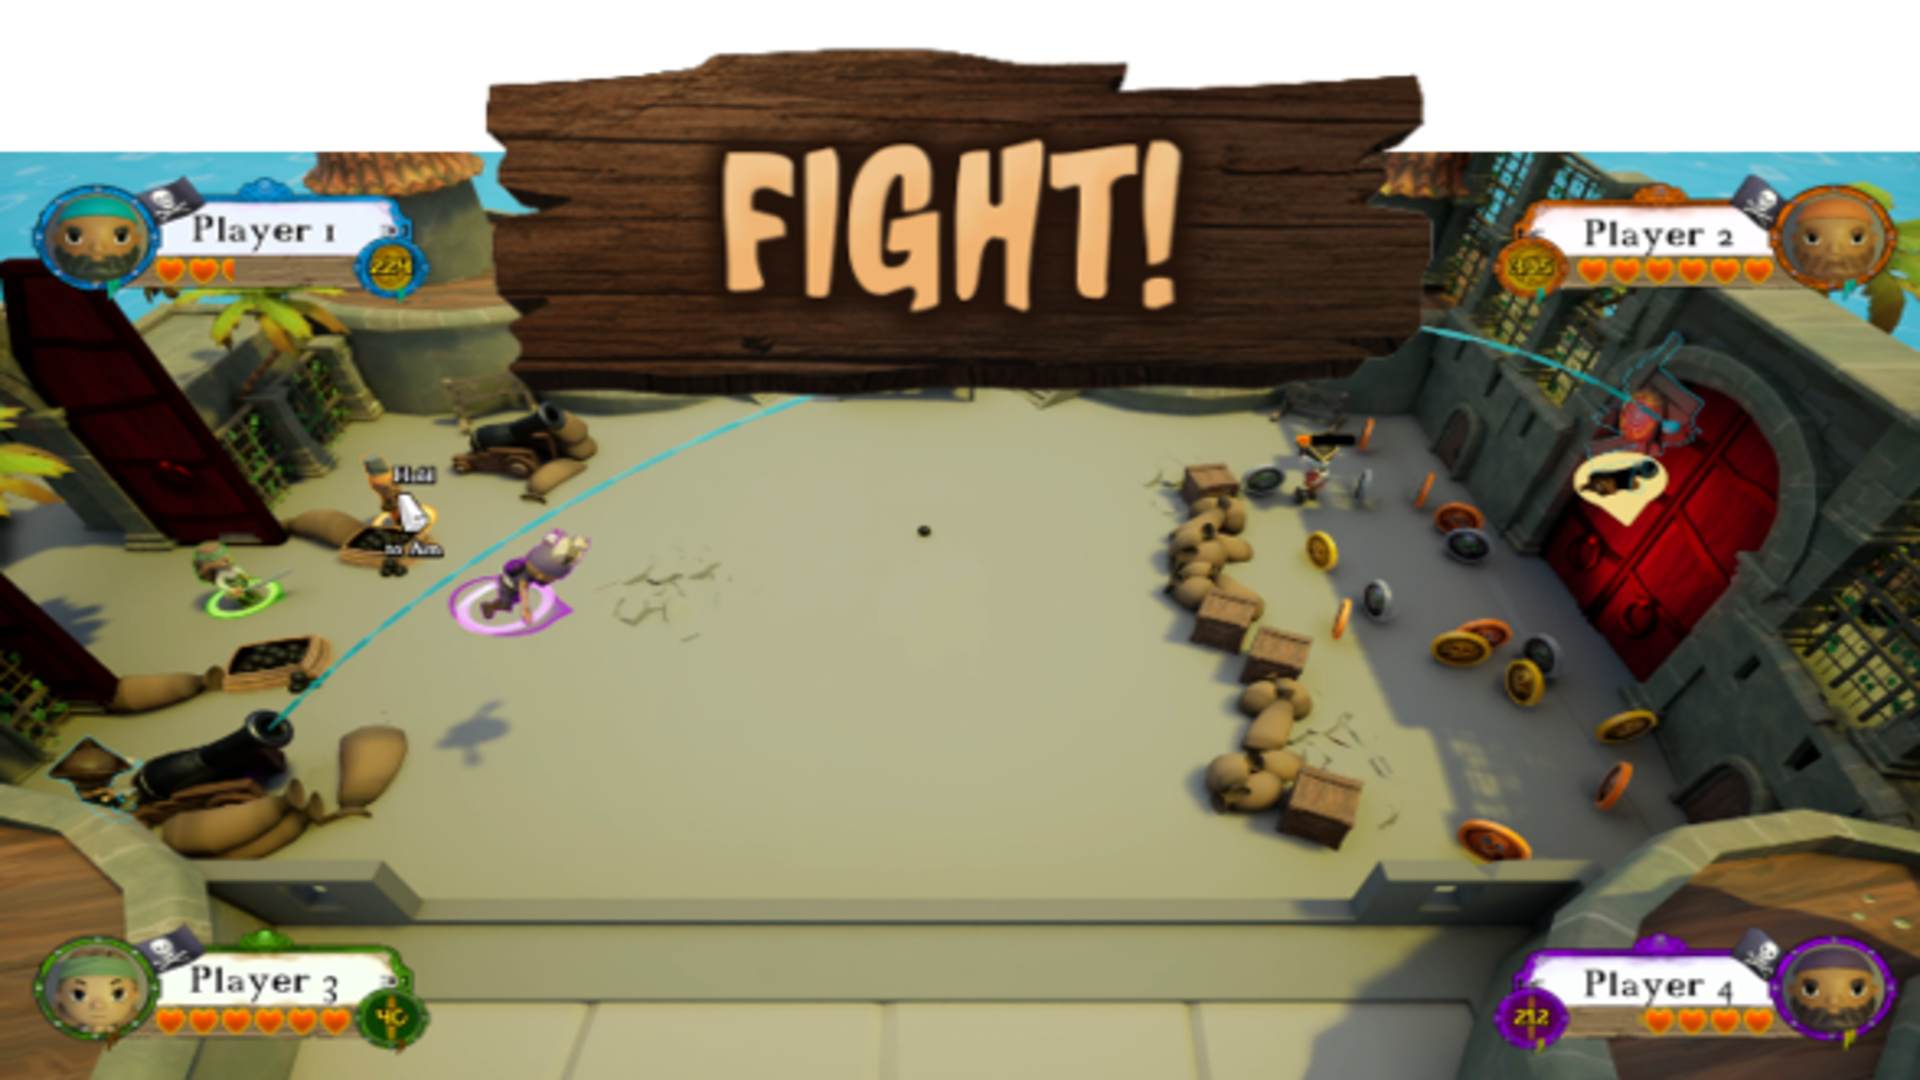 Screenshot 2 of the game Set Sail! with the heading 'Fight'